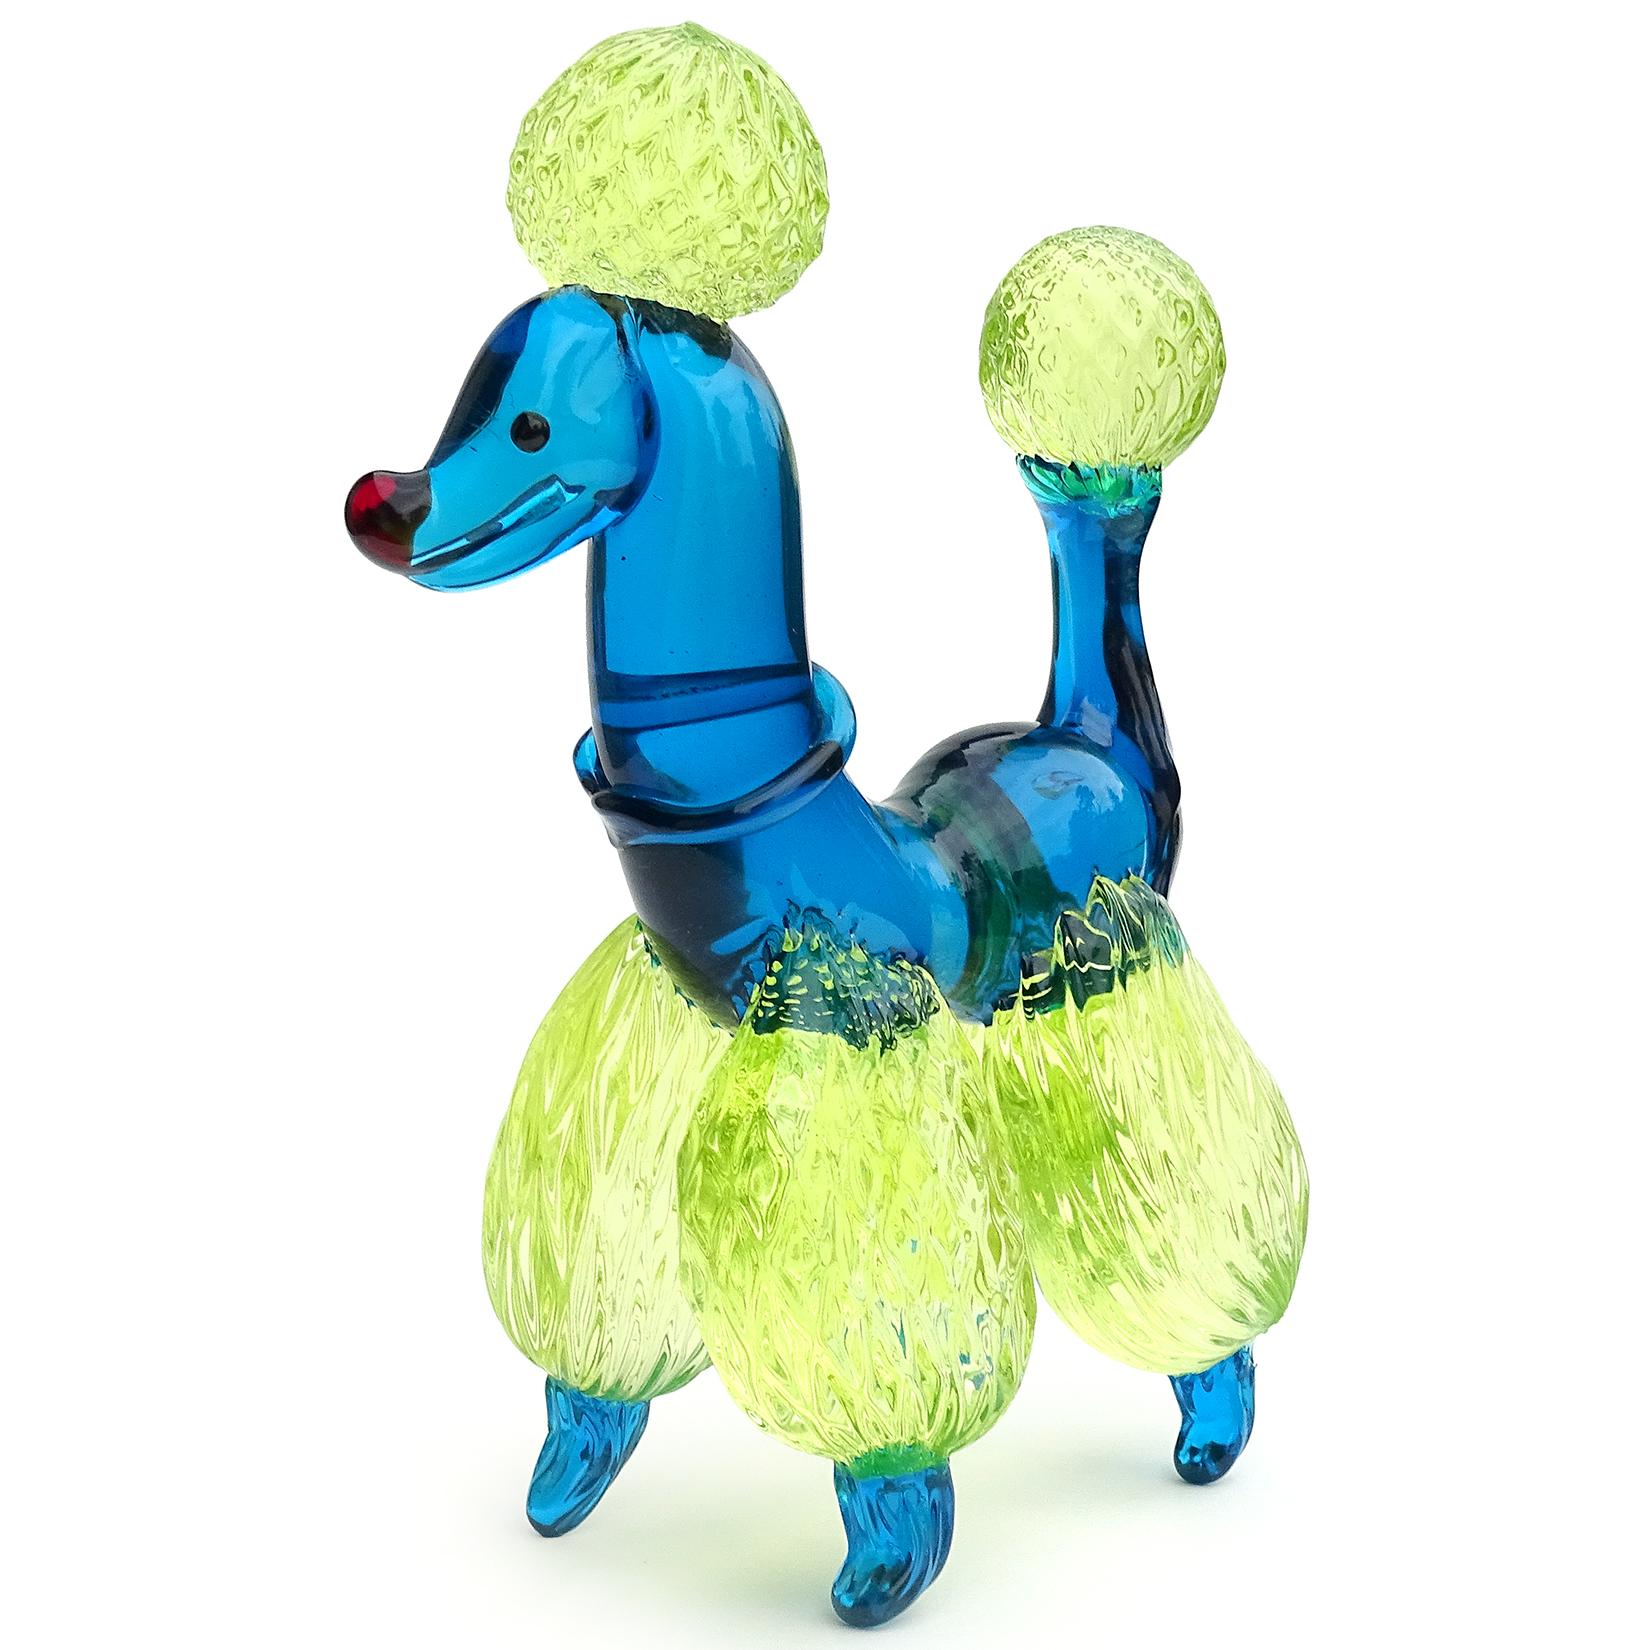 Beautiful vintage Murano hand blown cobalt blue and yellow Italian art glass poodle puppy dog sculpture. It has a quilted pom-pom design on the legs, tails and puff on its head. Blue collar on his neck, red eyes and nose. The fur glows under a black